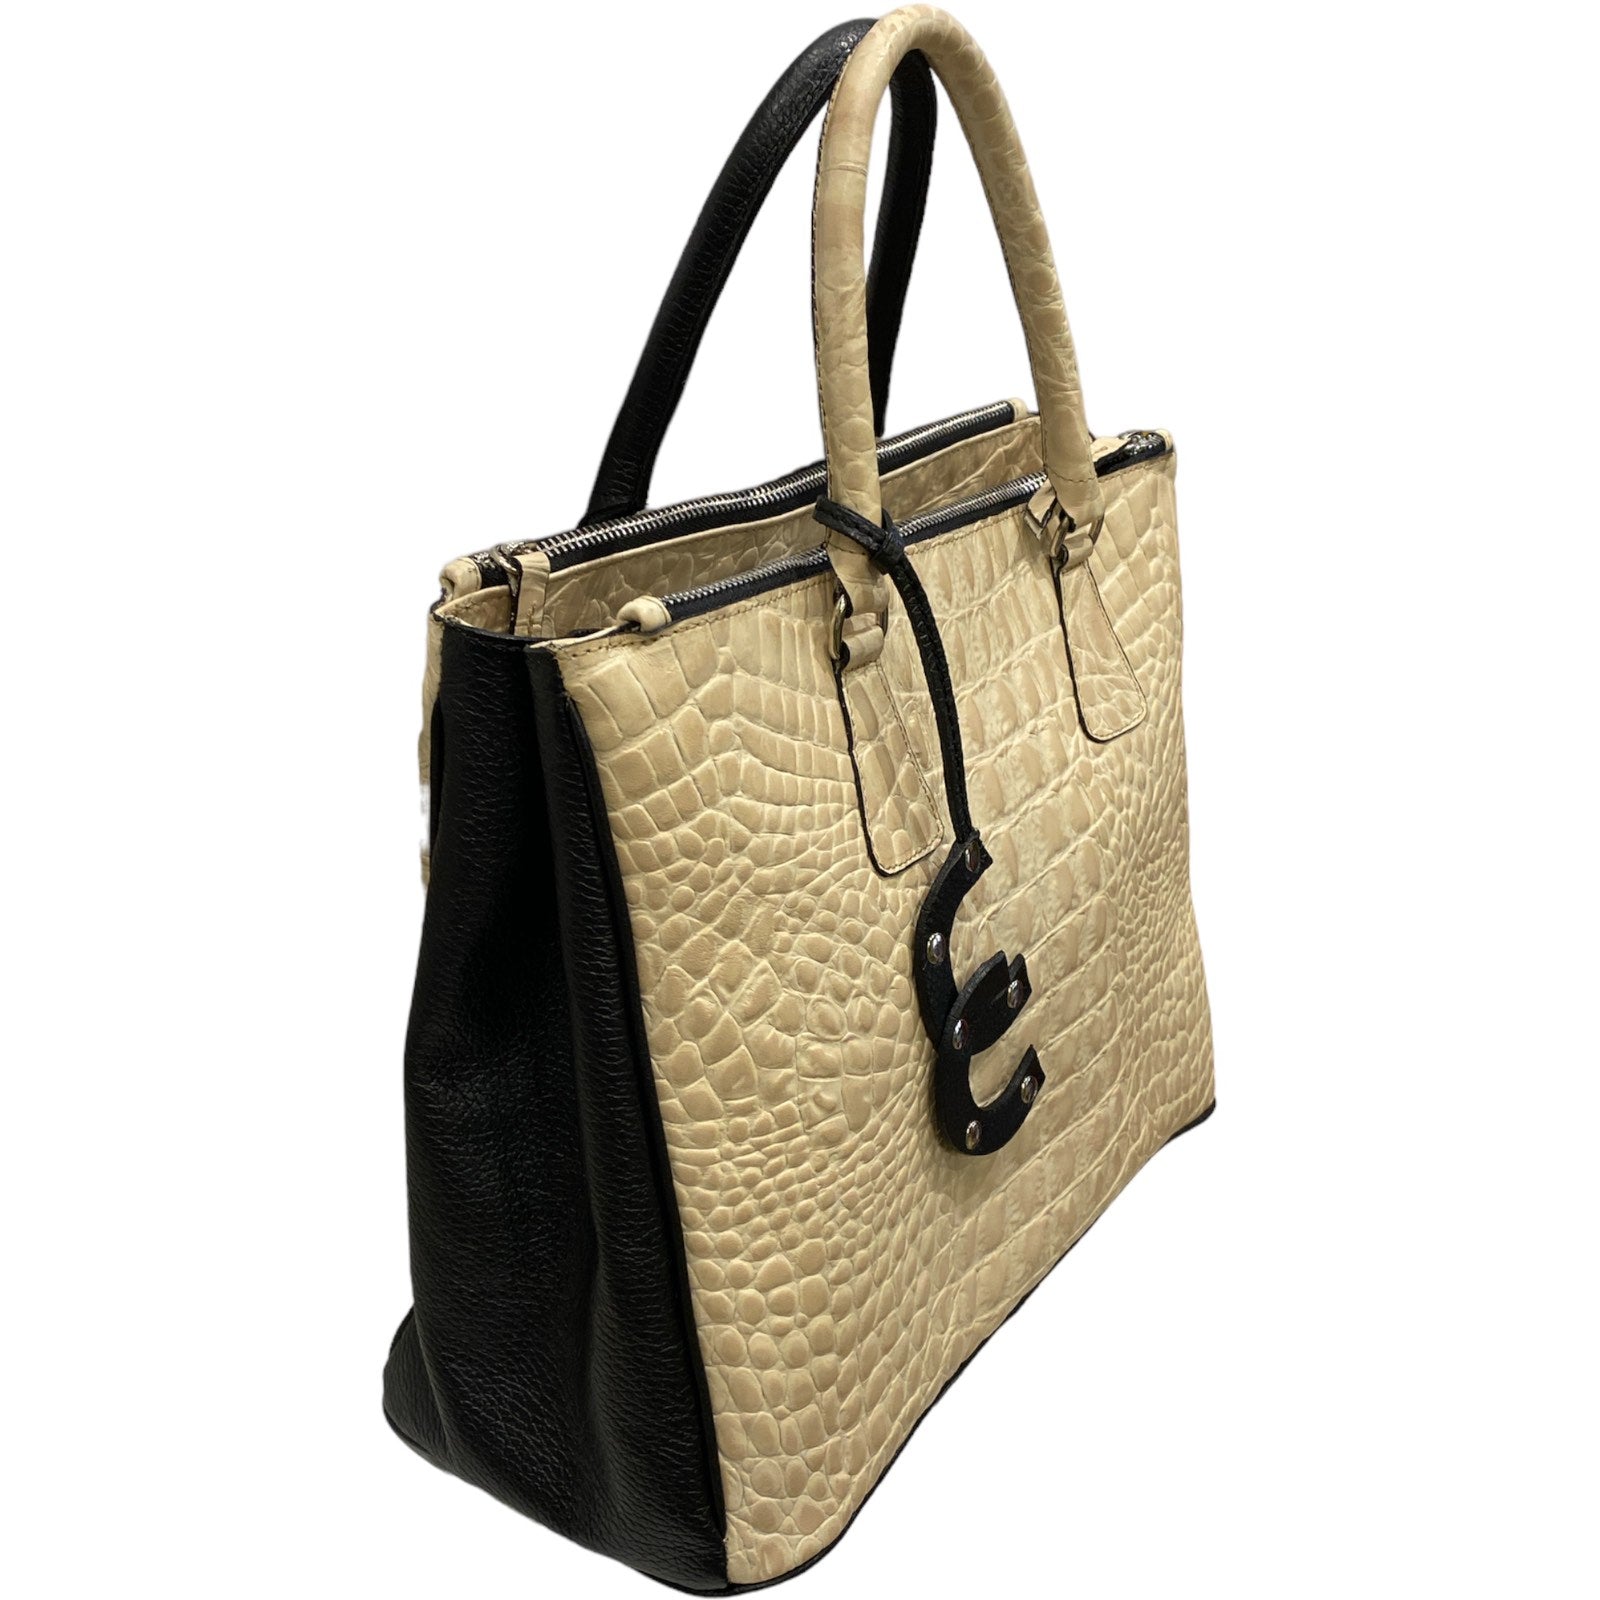 Diana M. Beige and black leather tote bag